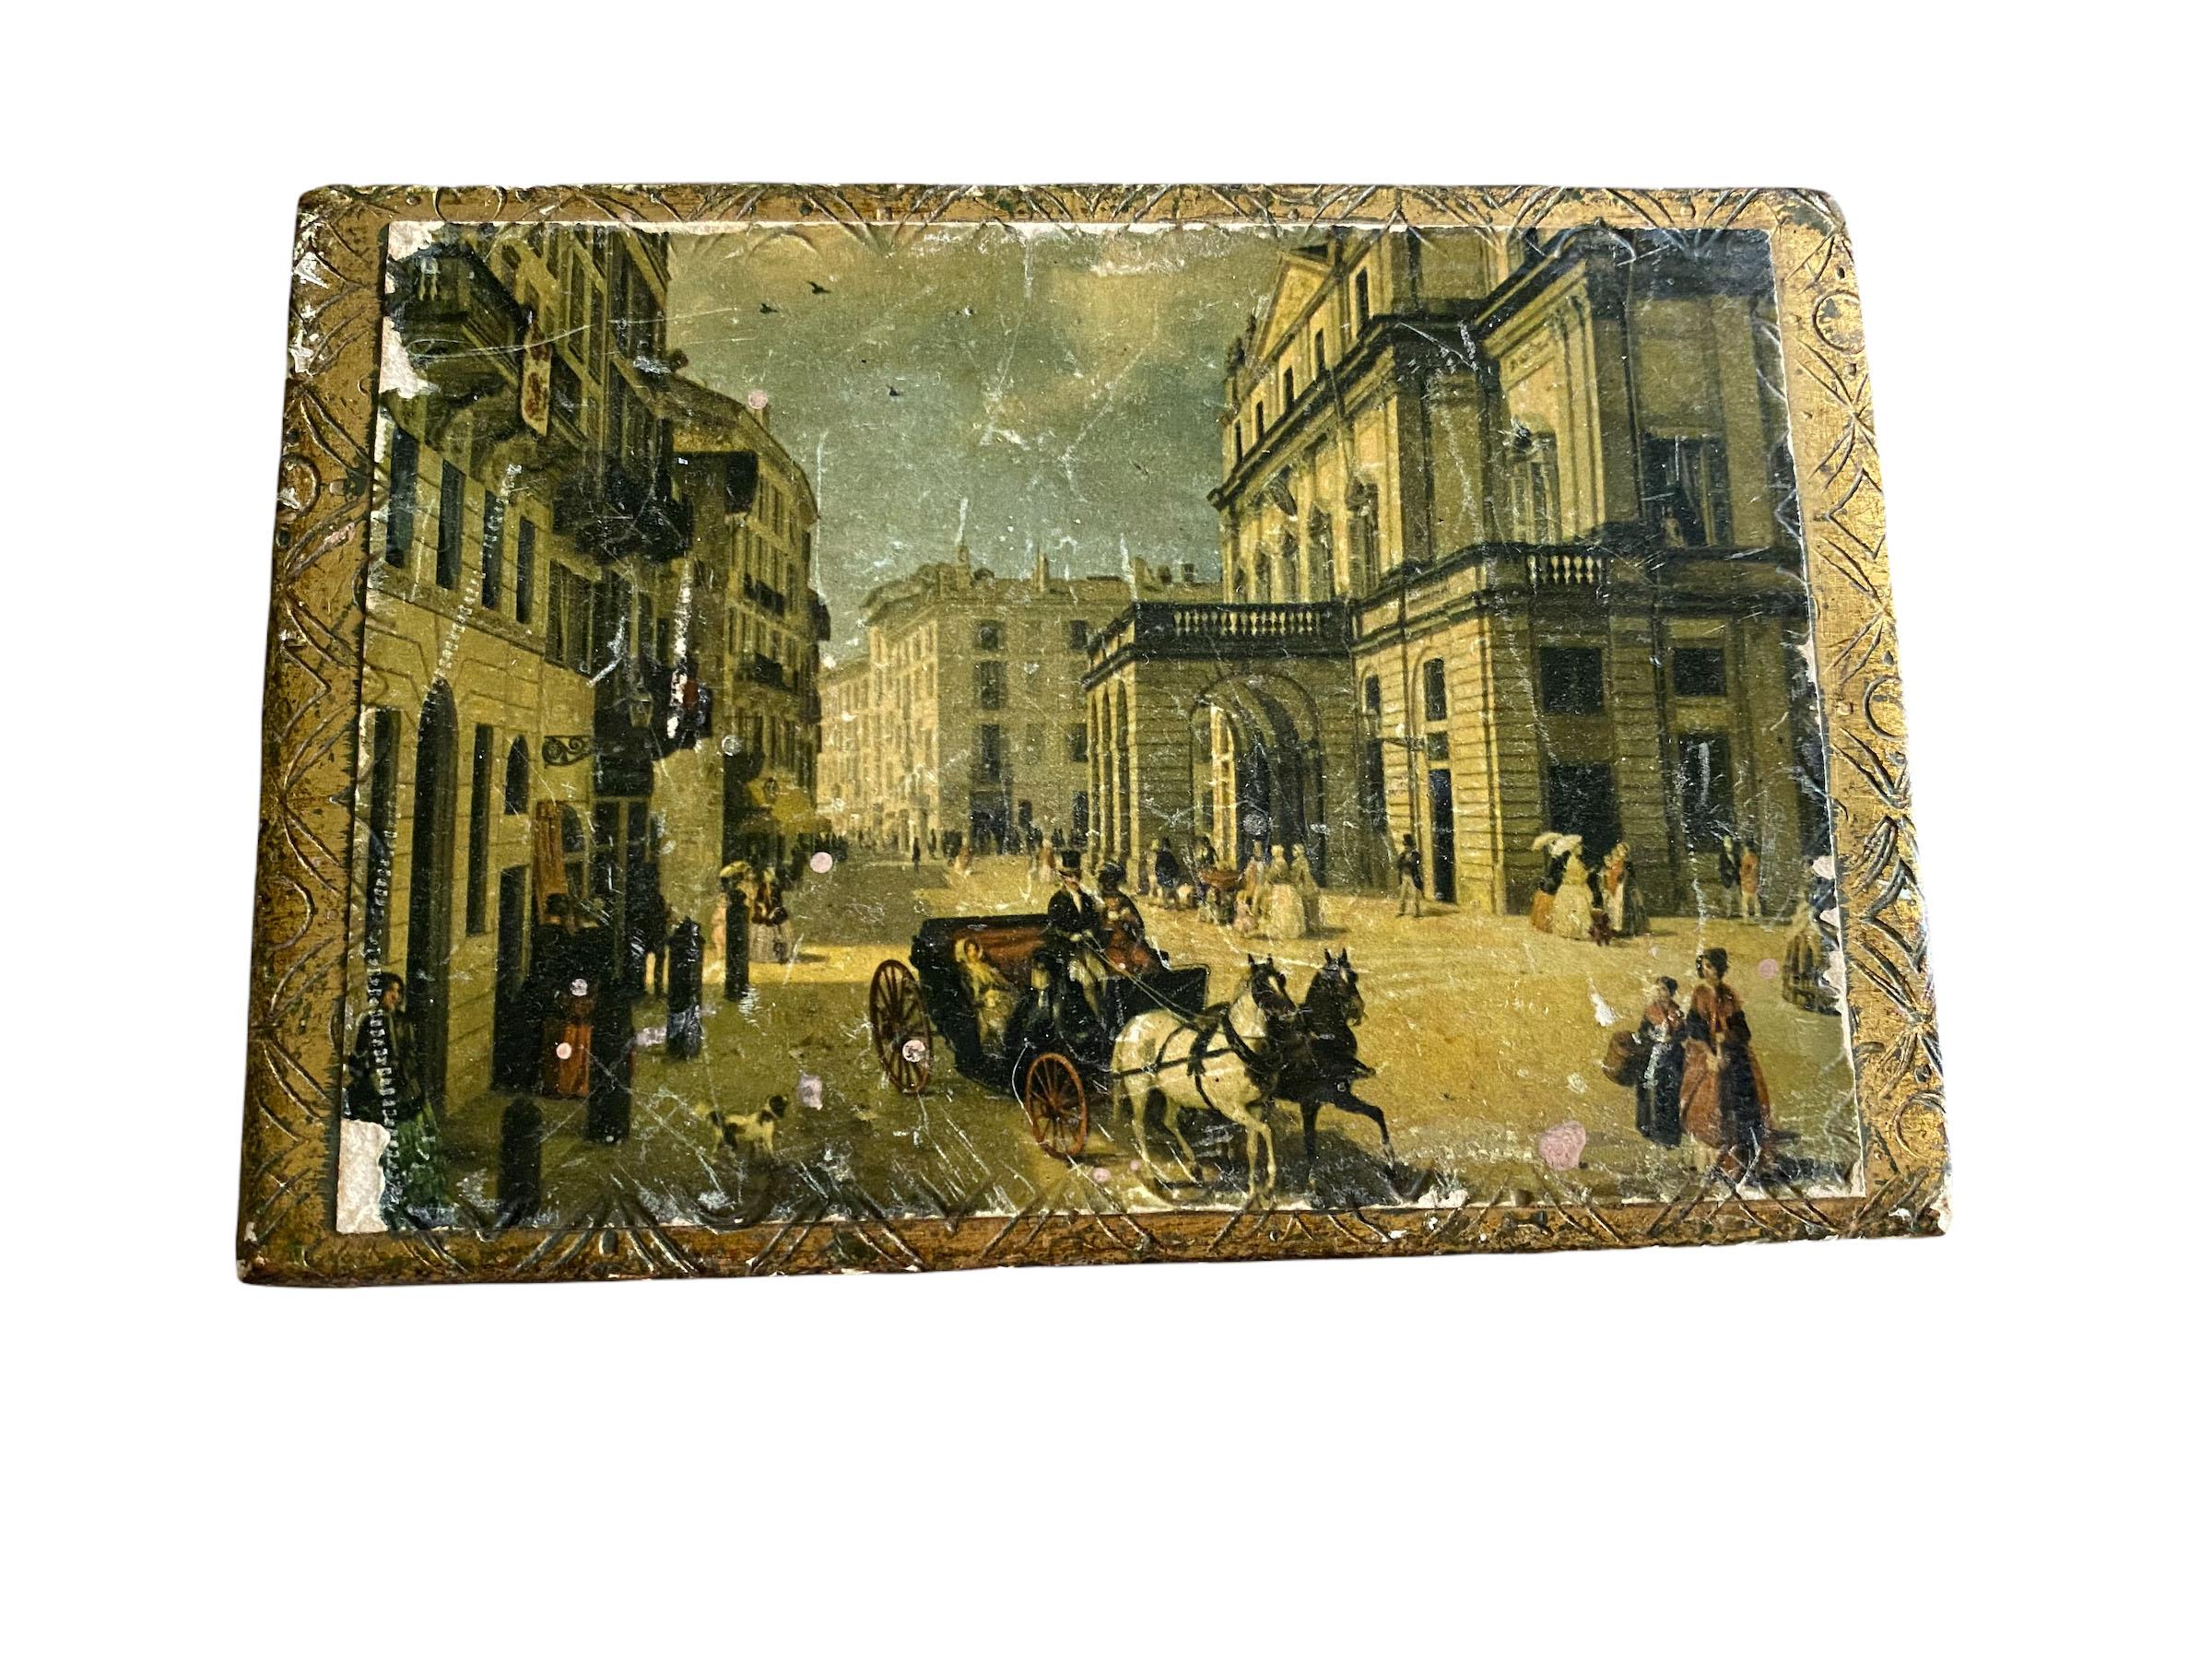 A mid century Italian florentine box with the top depicting an antique street scene. Some wear to top but still displays nicely.